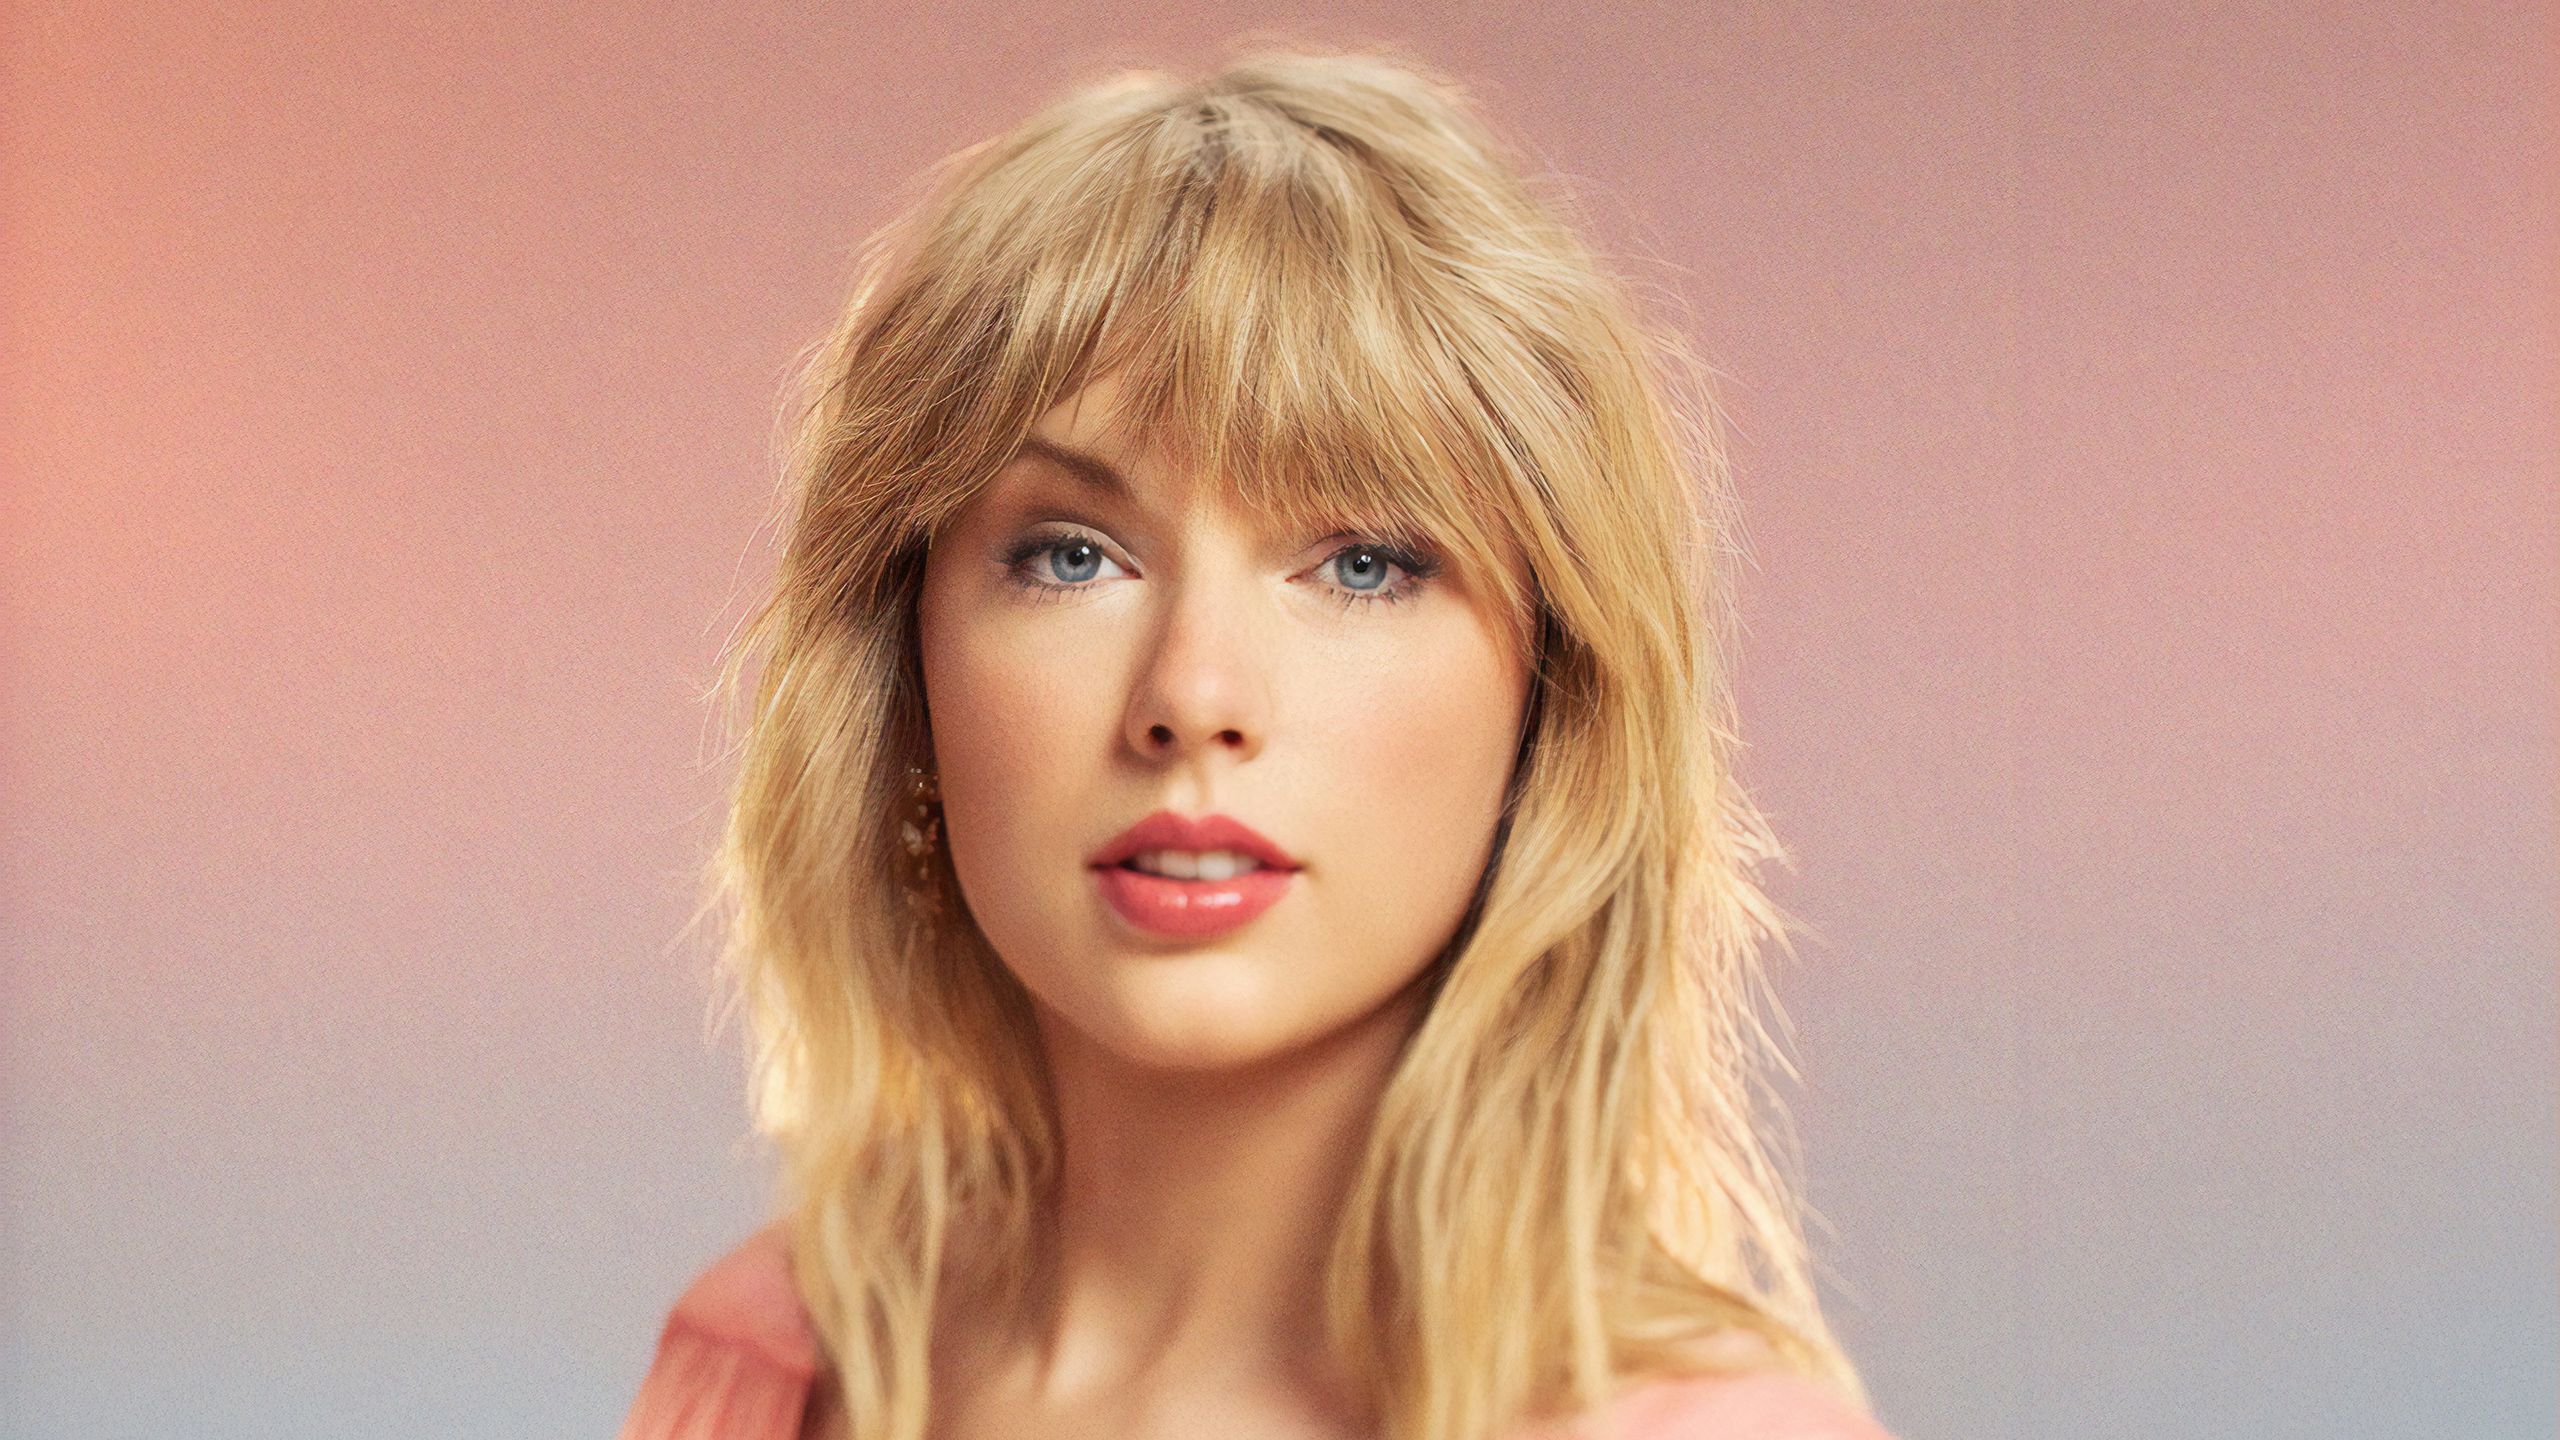 Taylor Swift For Time Magazine Photohoot, HD Music, 4k Wallpaper, Image, Background, Photo and Picture